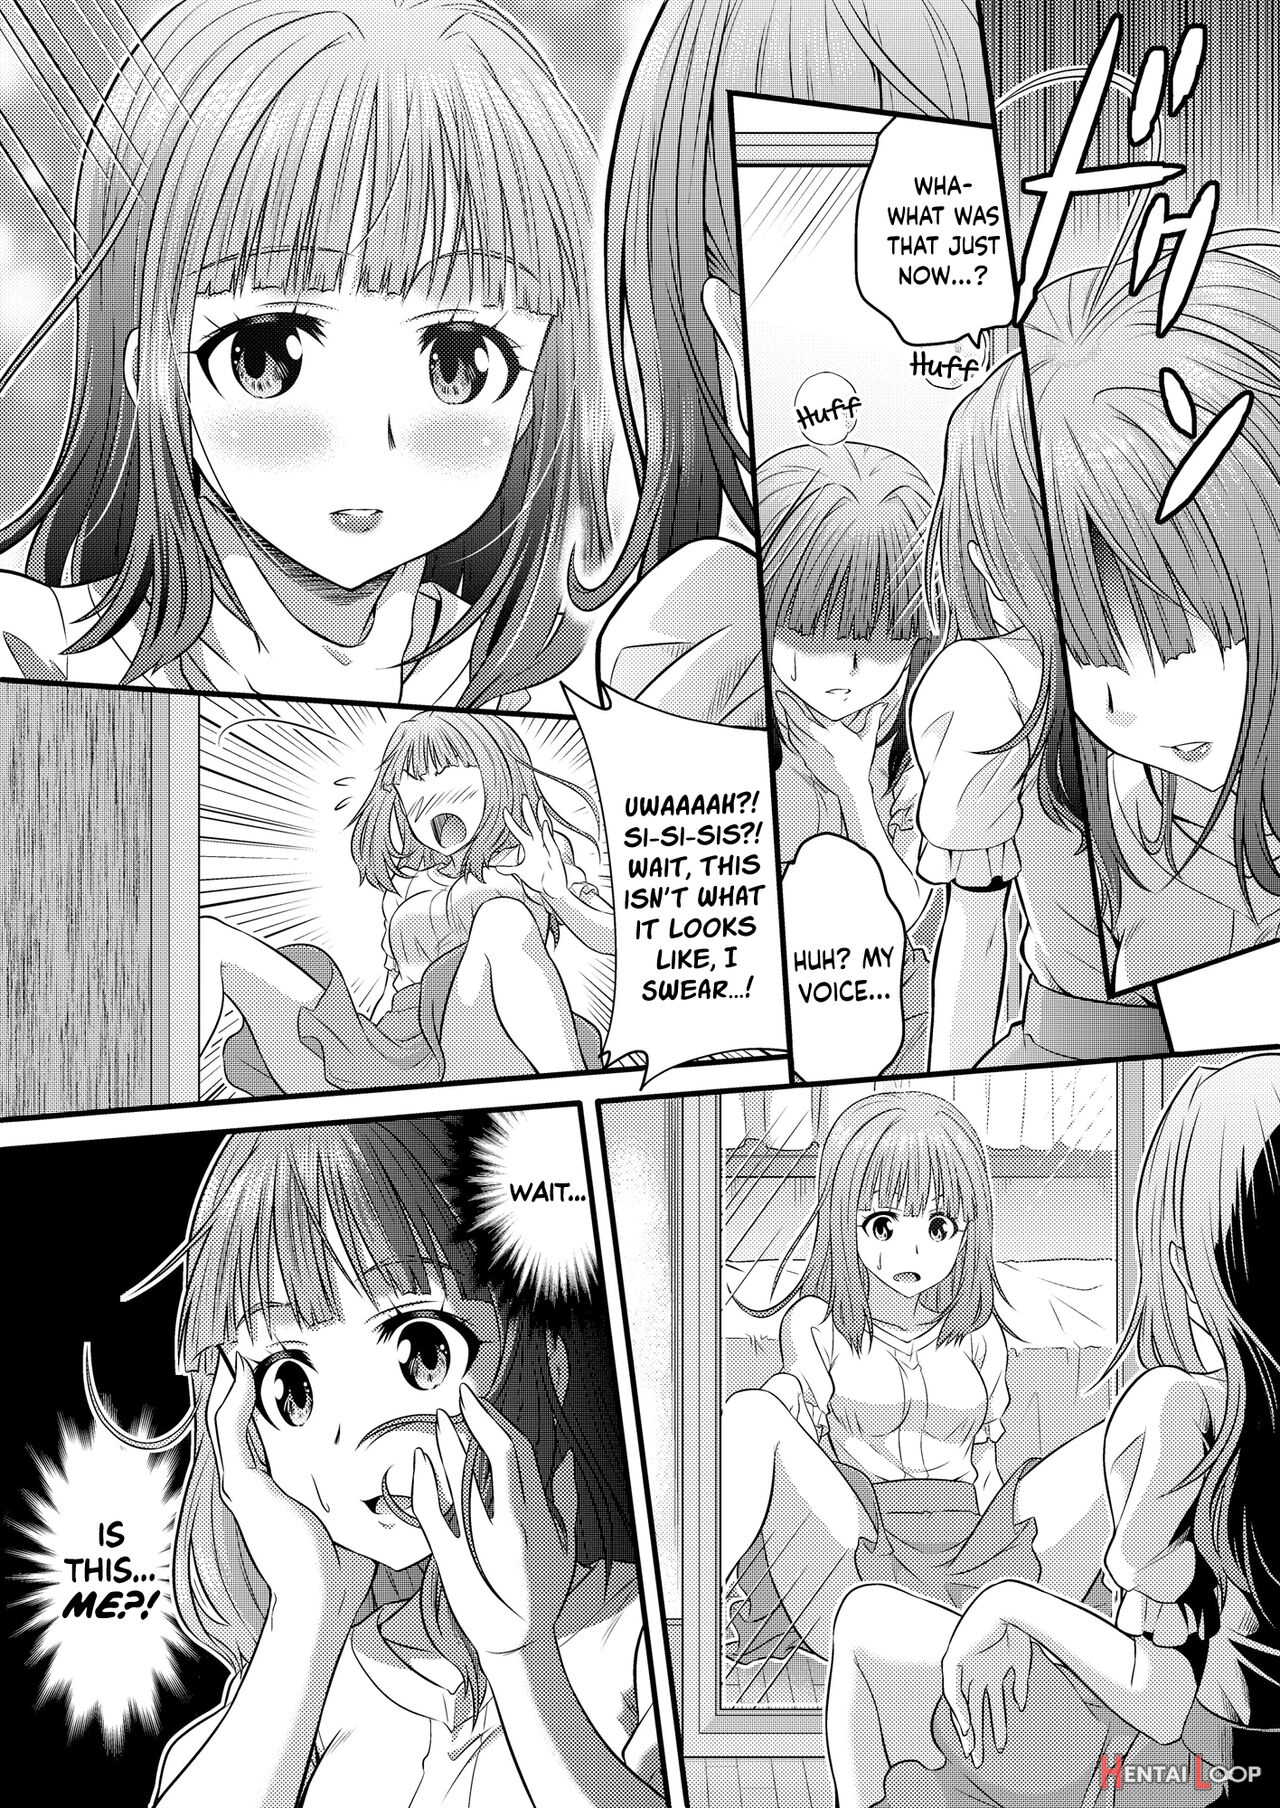 Metamorphic ★ Dress-up ~how I Ended Up Turning Into The Girls I Cross-dressed As~ Sister Arc & Classmate Arc page 7